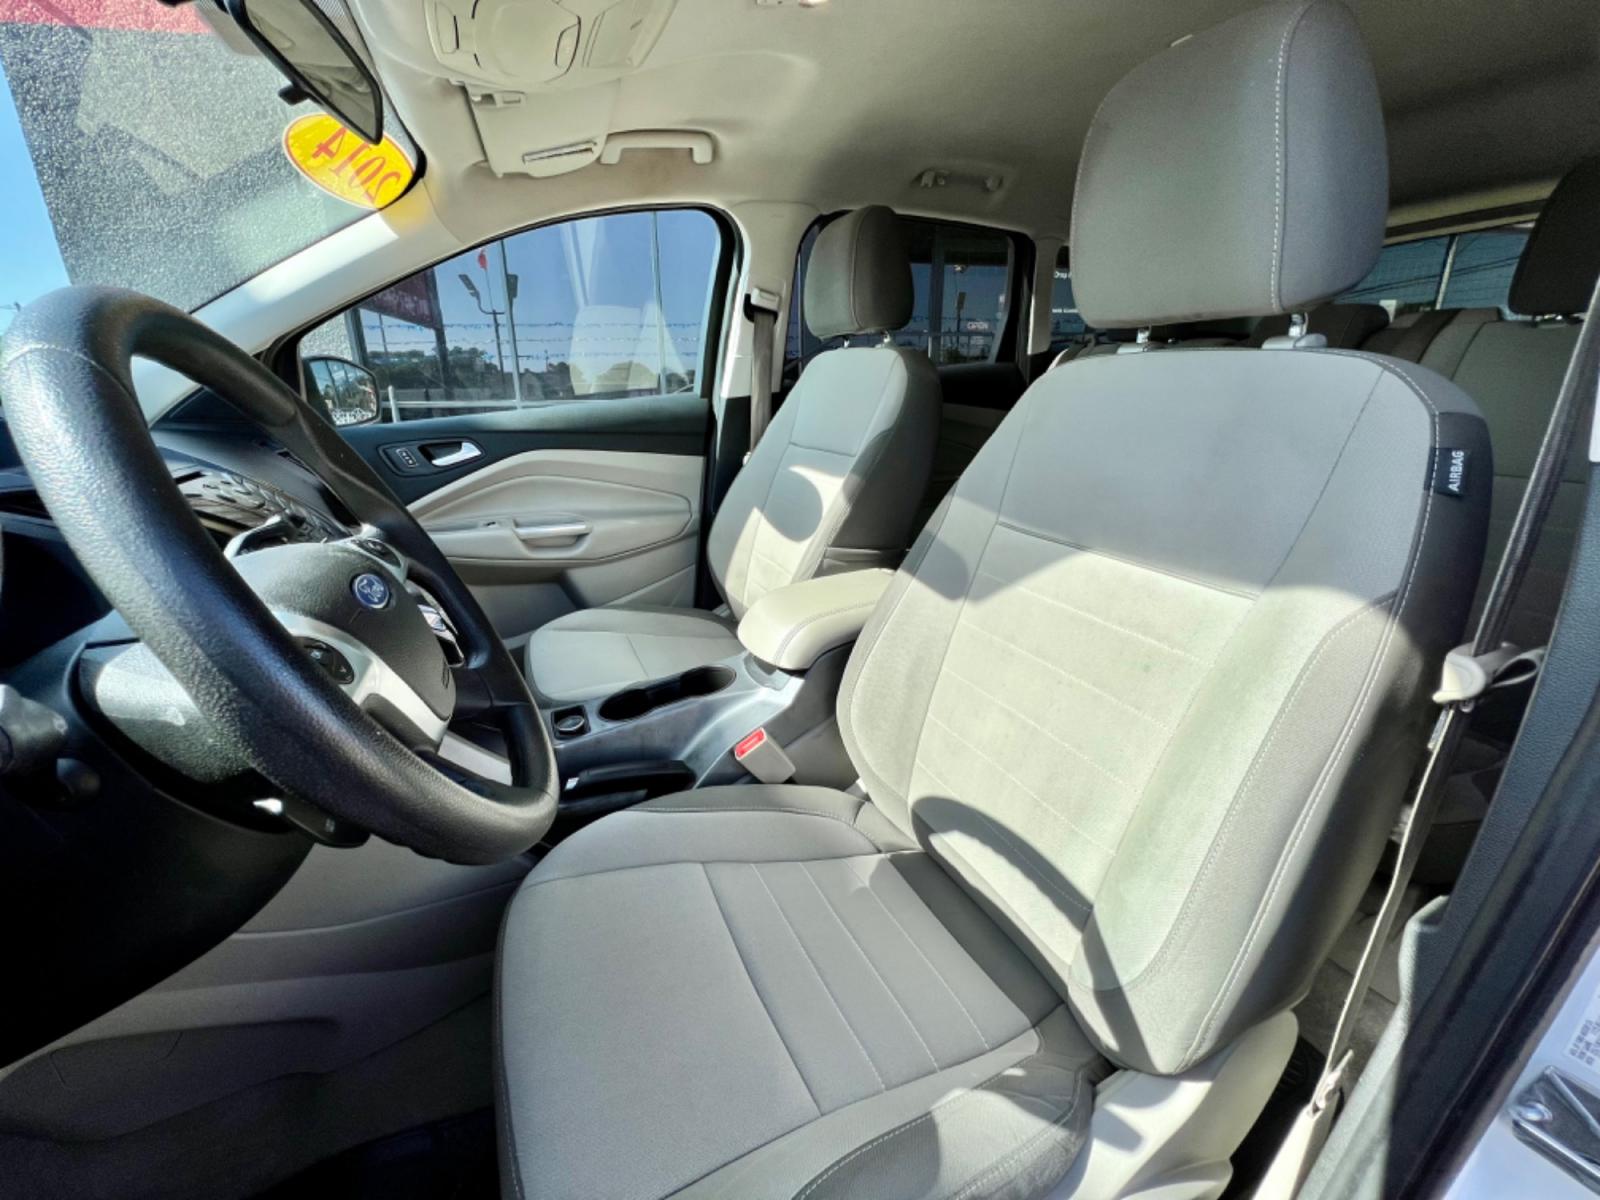 2014 WHITE FORD ESCAPE (1FMCU9GX7EU) , located at 5900 E. Lancaster Ave., Fort Worth, TX, 76112, (817) 457-5456, 0.000000, 0.000000 - This is a 2014 FORD ESCAPE SPORT UTILITY 4-DR that is in excellent condition. There are no dents or scratches. The interior is clean with no rips or tears or stains. All power windows, door locks and seats. Ice cold AC for those hot Texas summer days. It is equipped with a CD player, AM/FM radio, AU - Photo #9